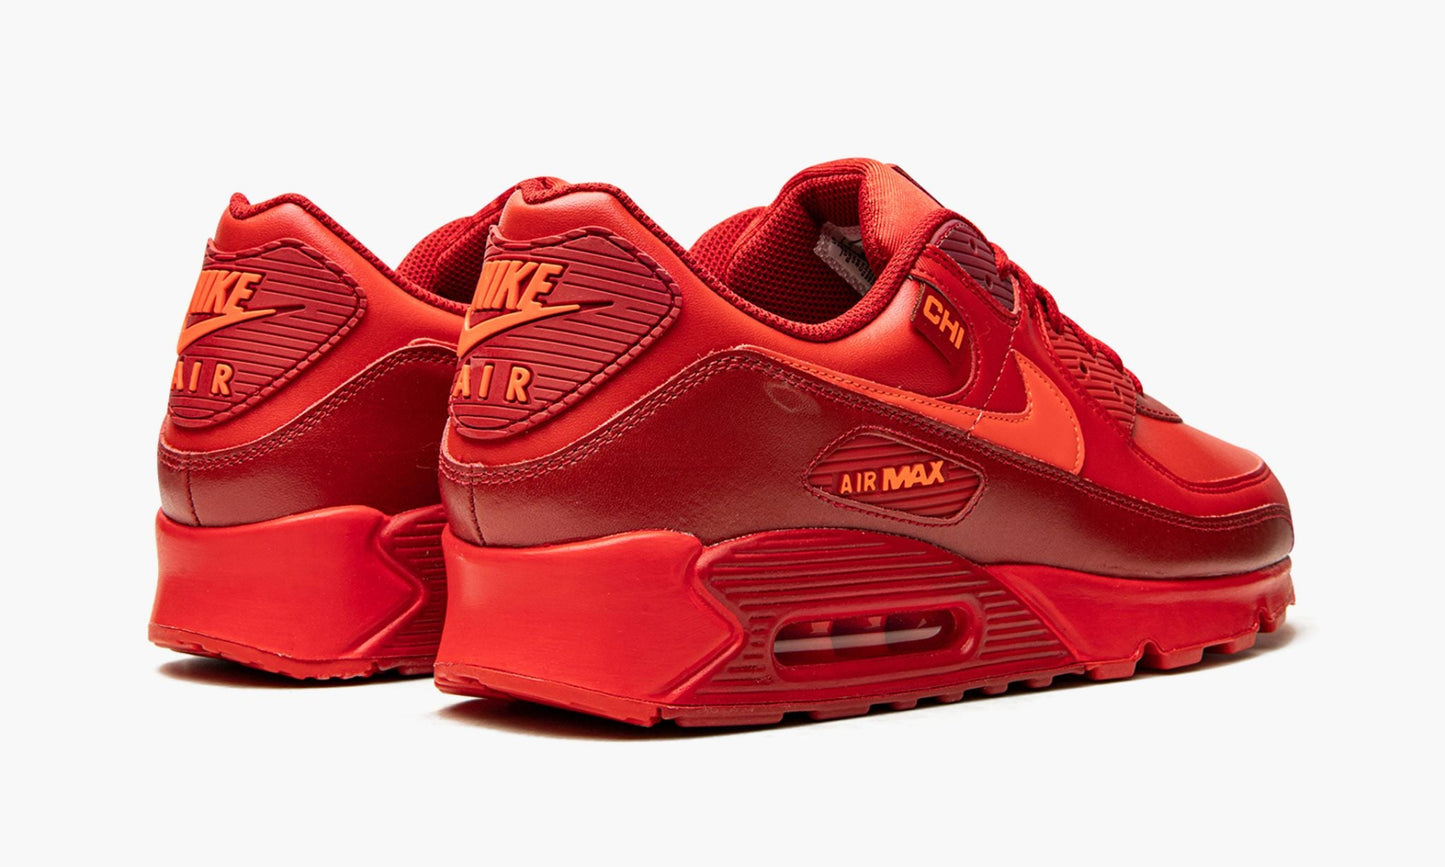 Air Max 90 "'City Special - Chicago'"